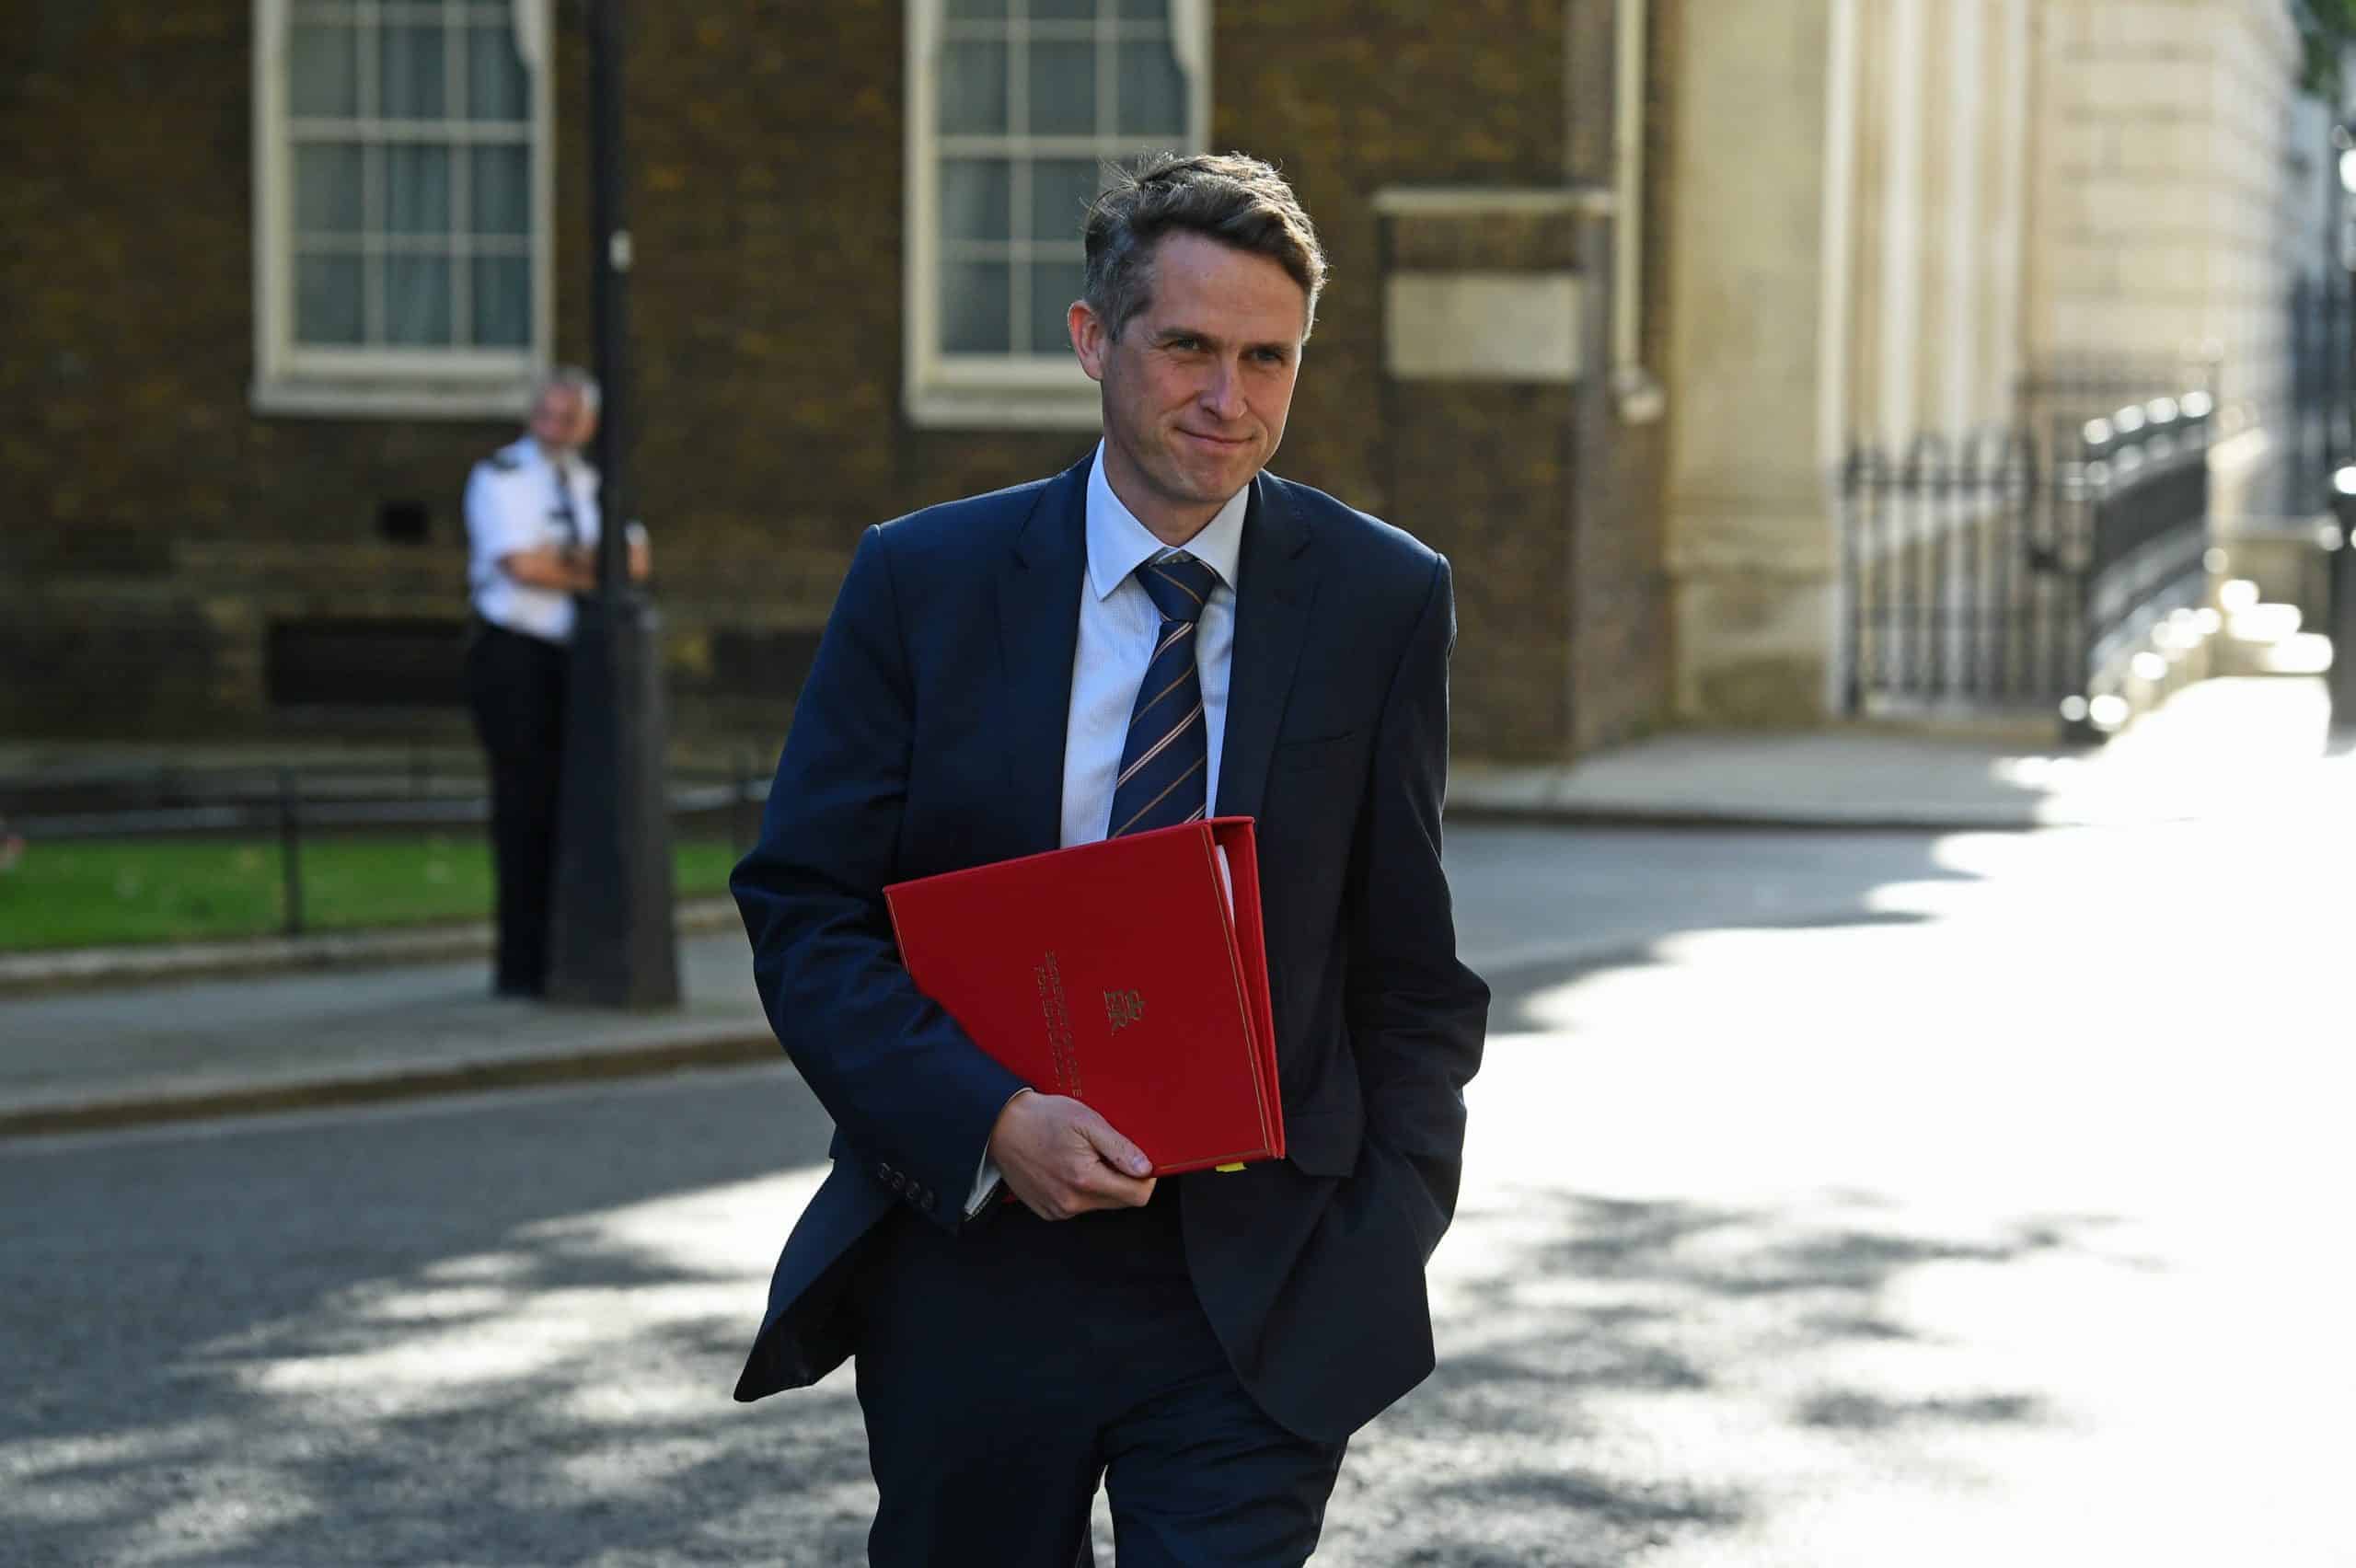 Labour bid for full disclosure of exams fiasco documents voted down by Tory MPs